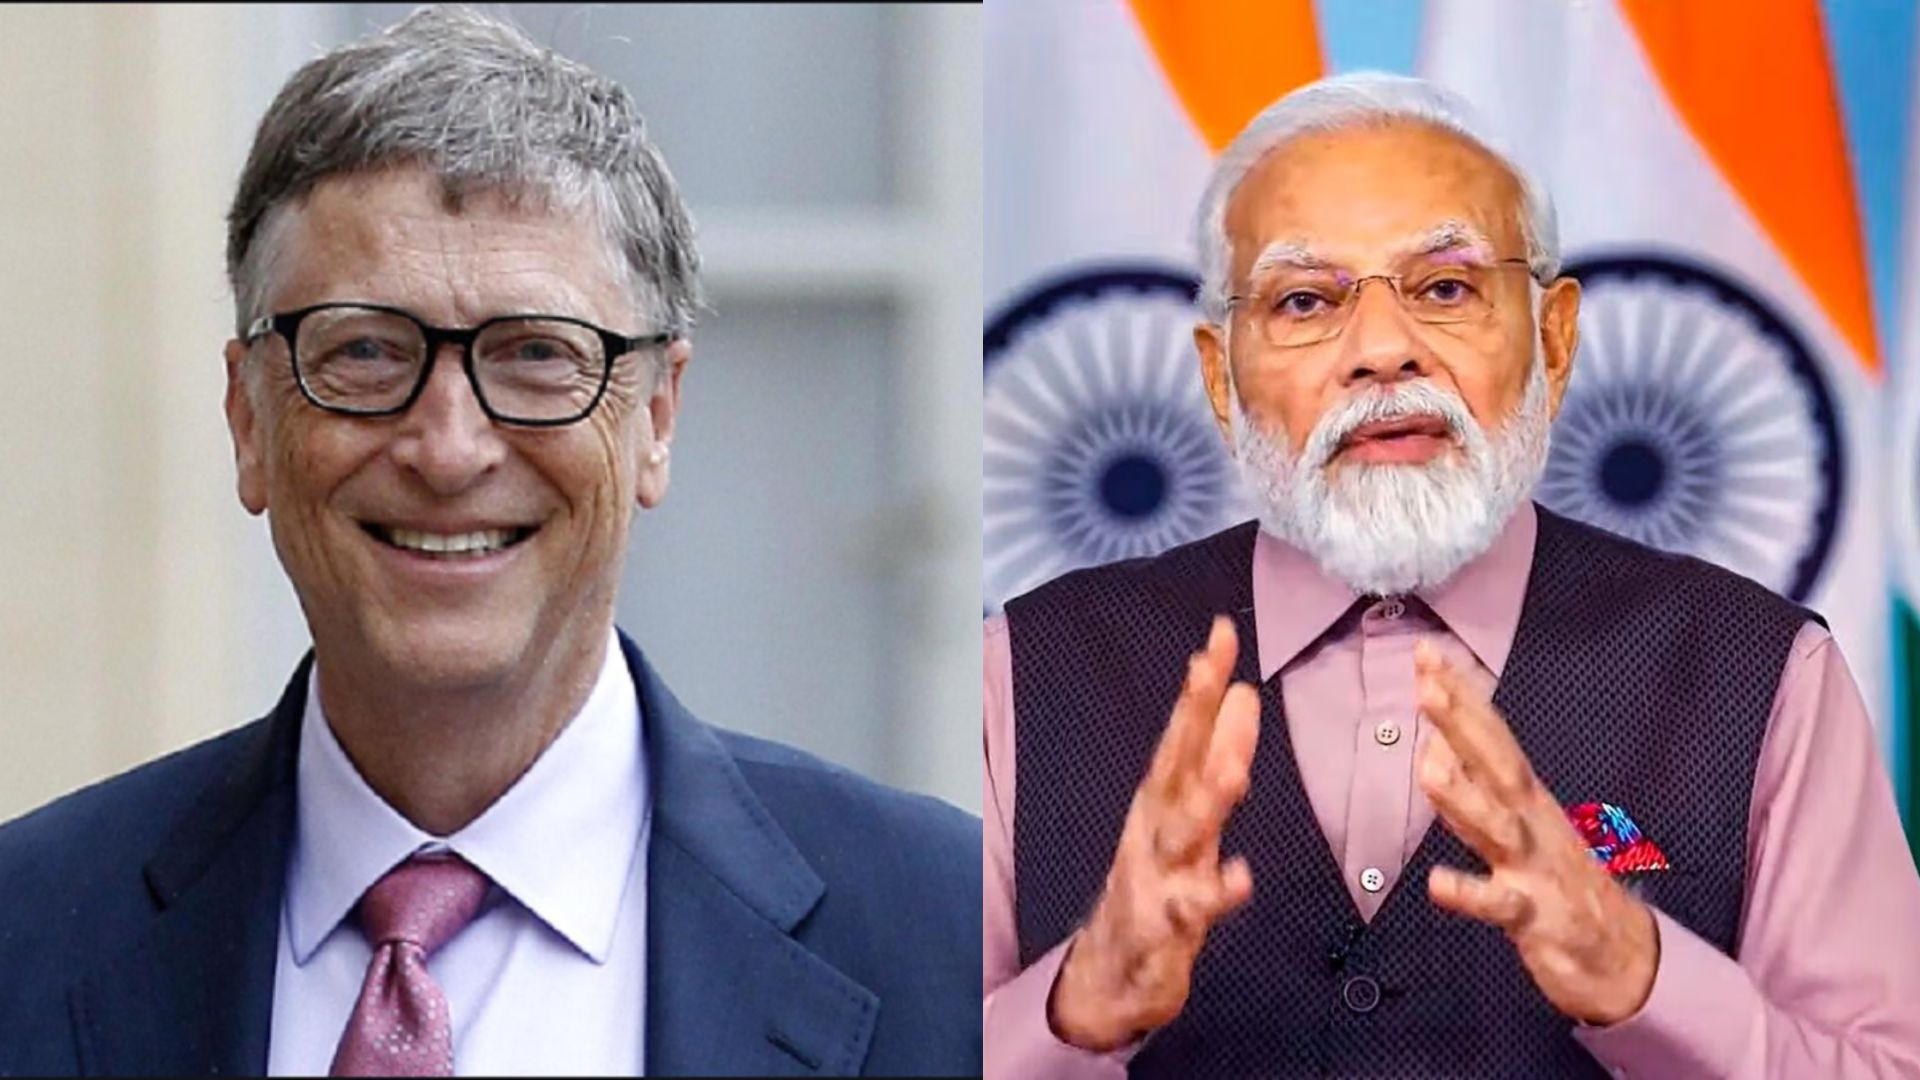 Don’t miss a very interesting discussion between Bill Gates and PM Modi; live at 9 AM today